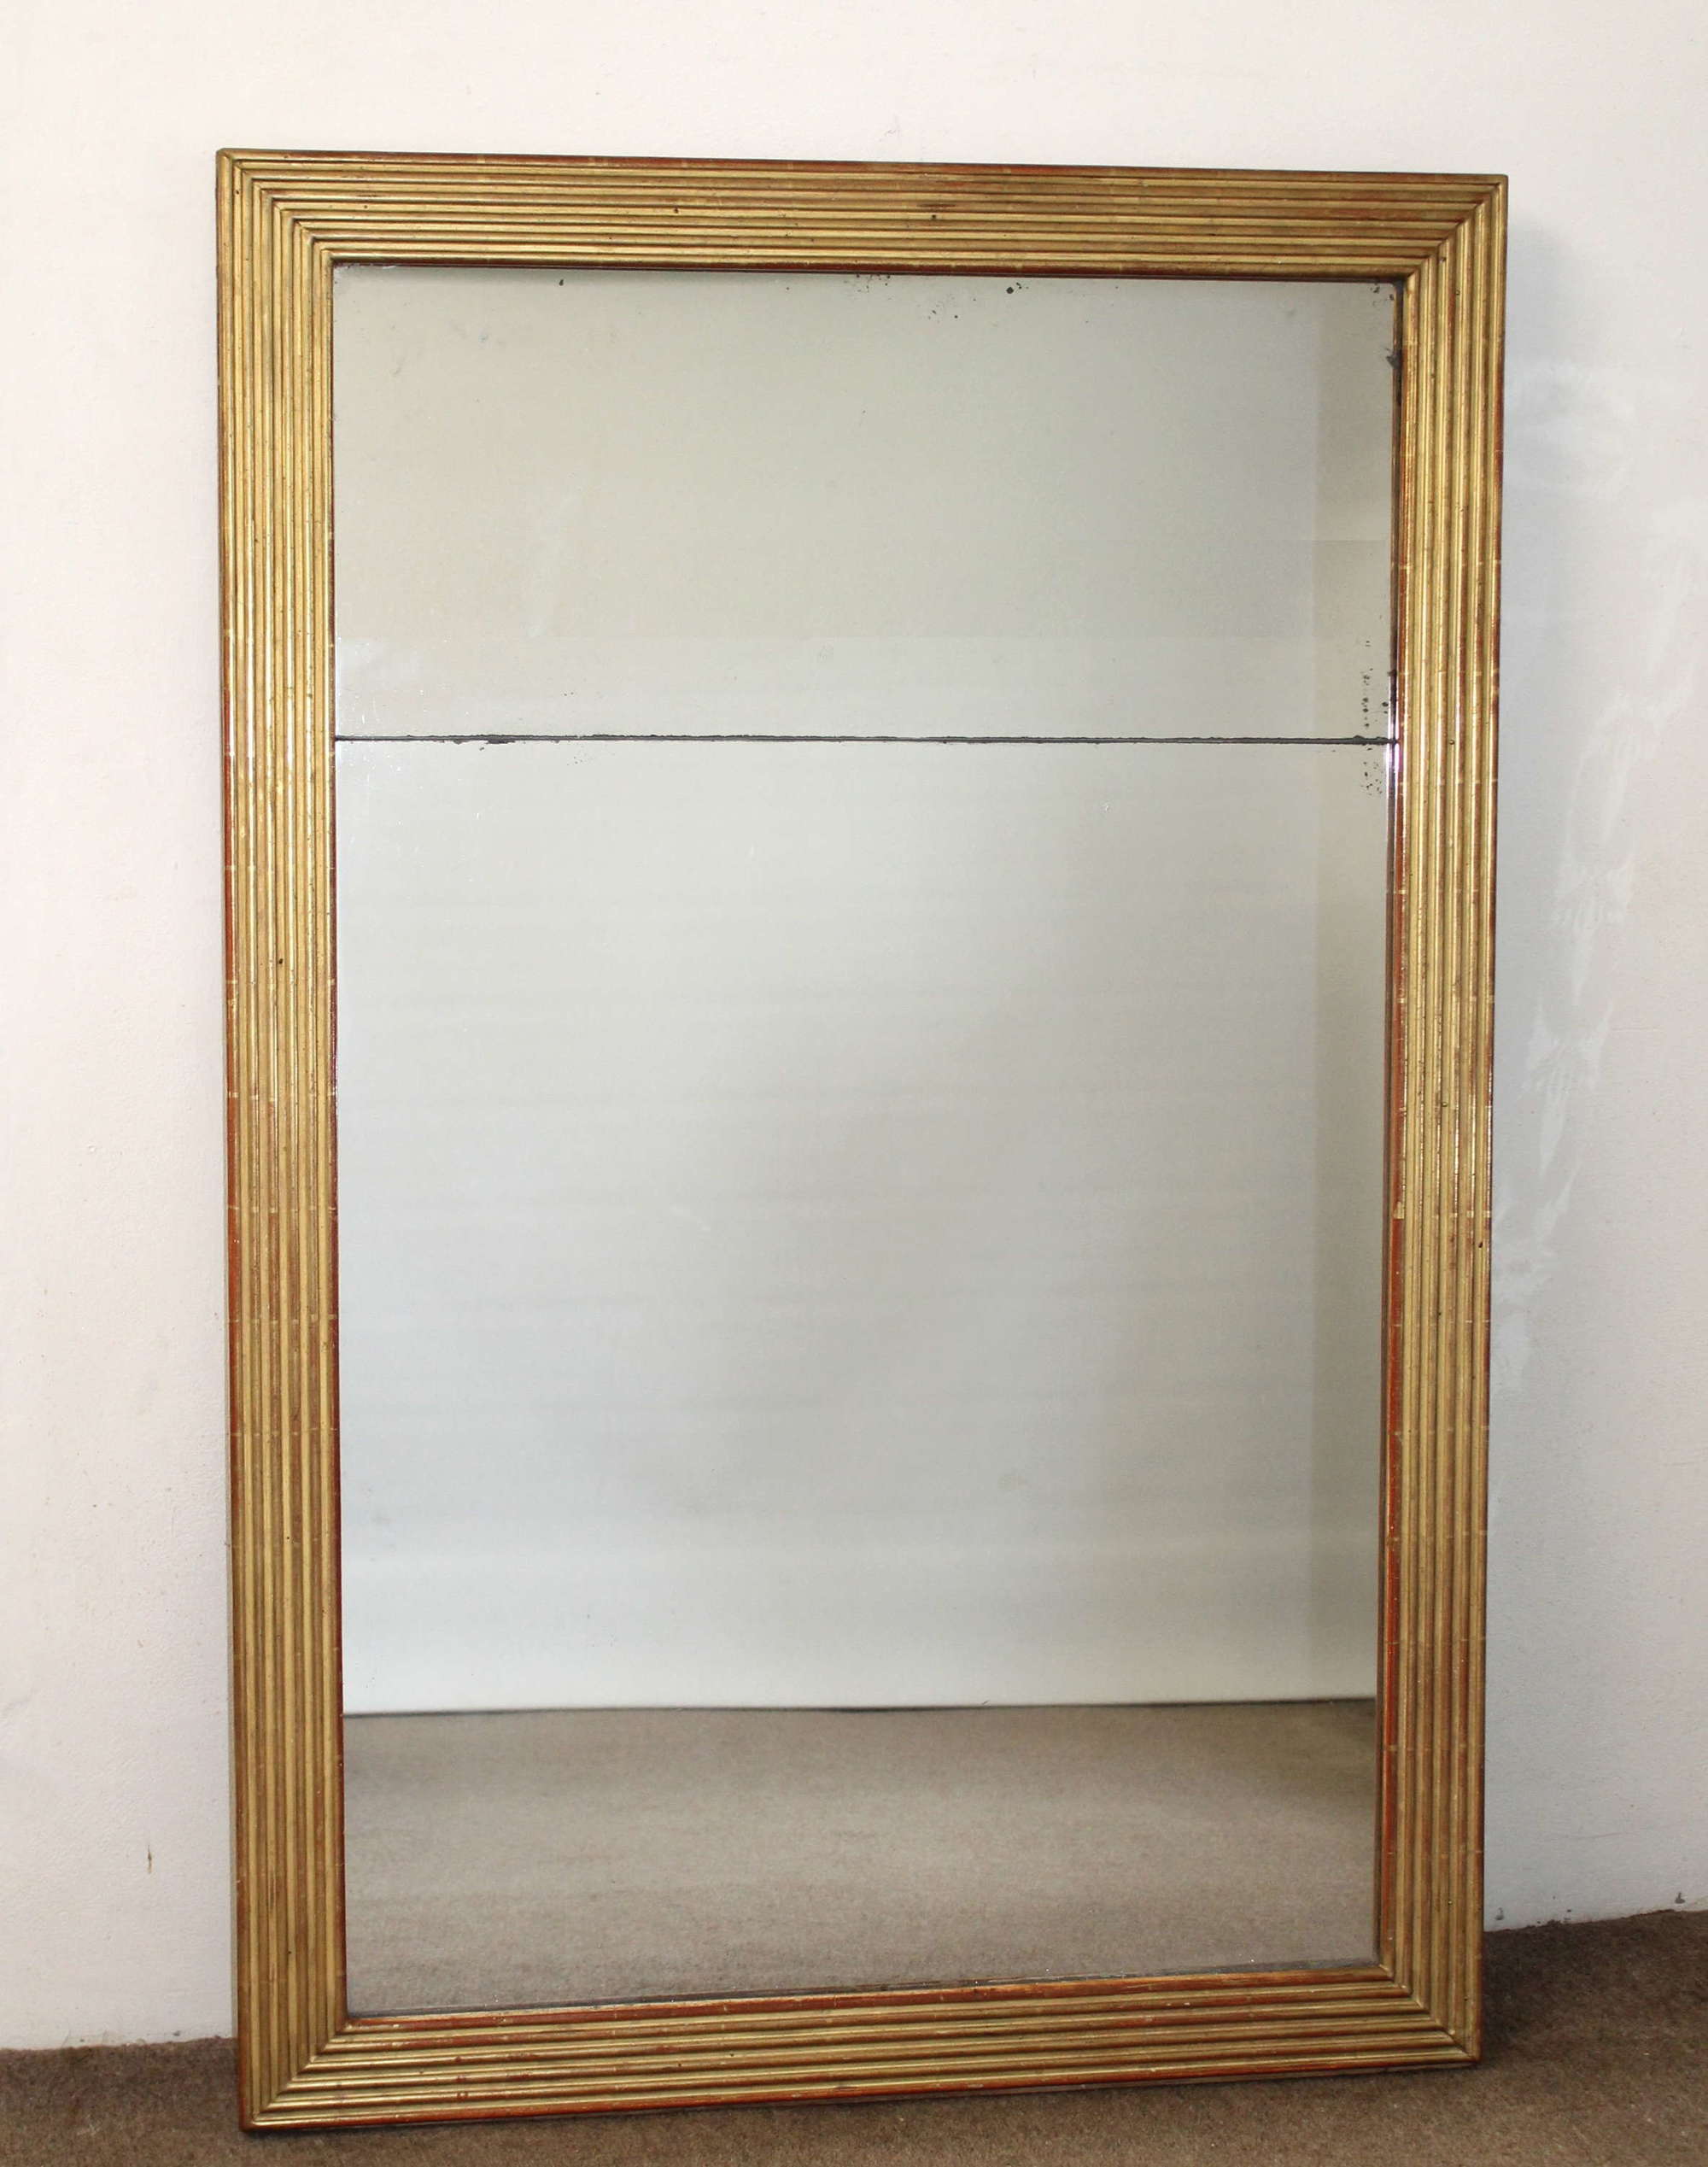 Antique French pier mirror with reeded frame